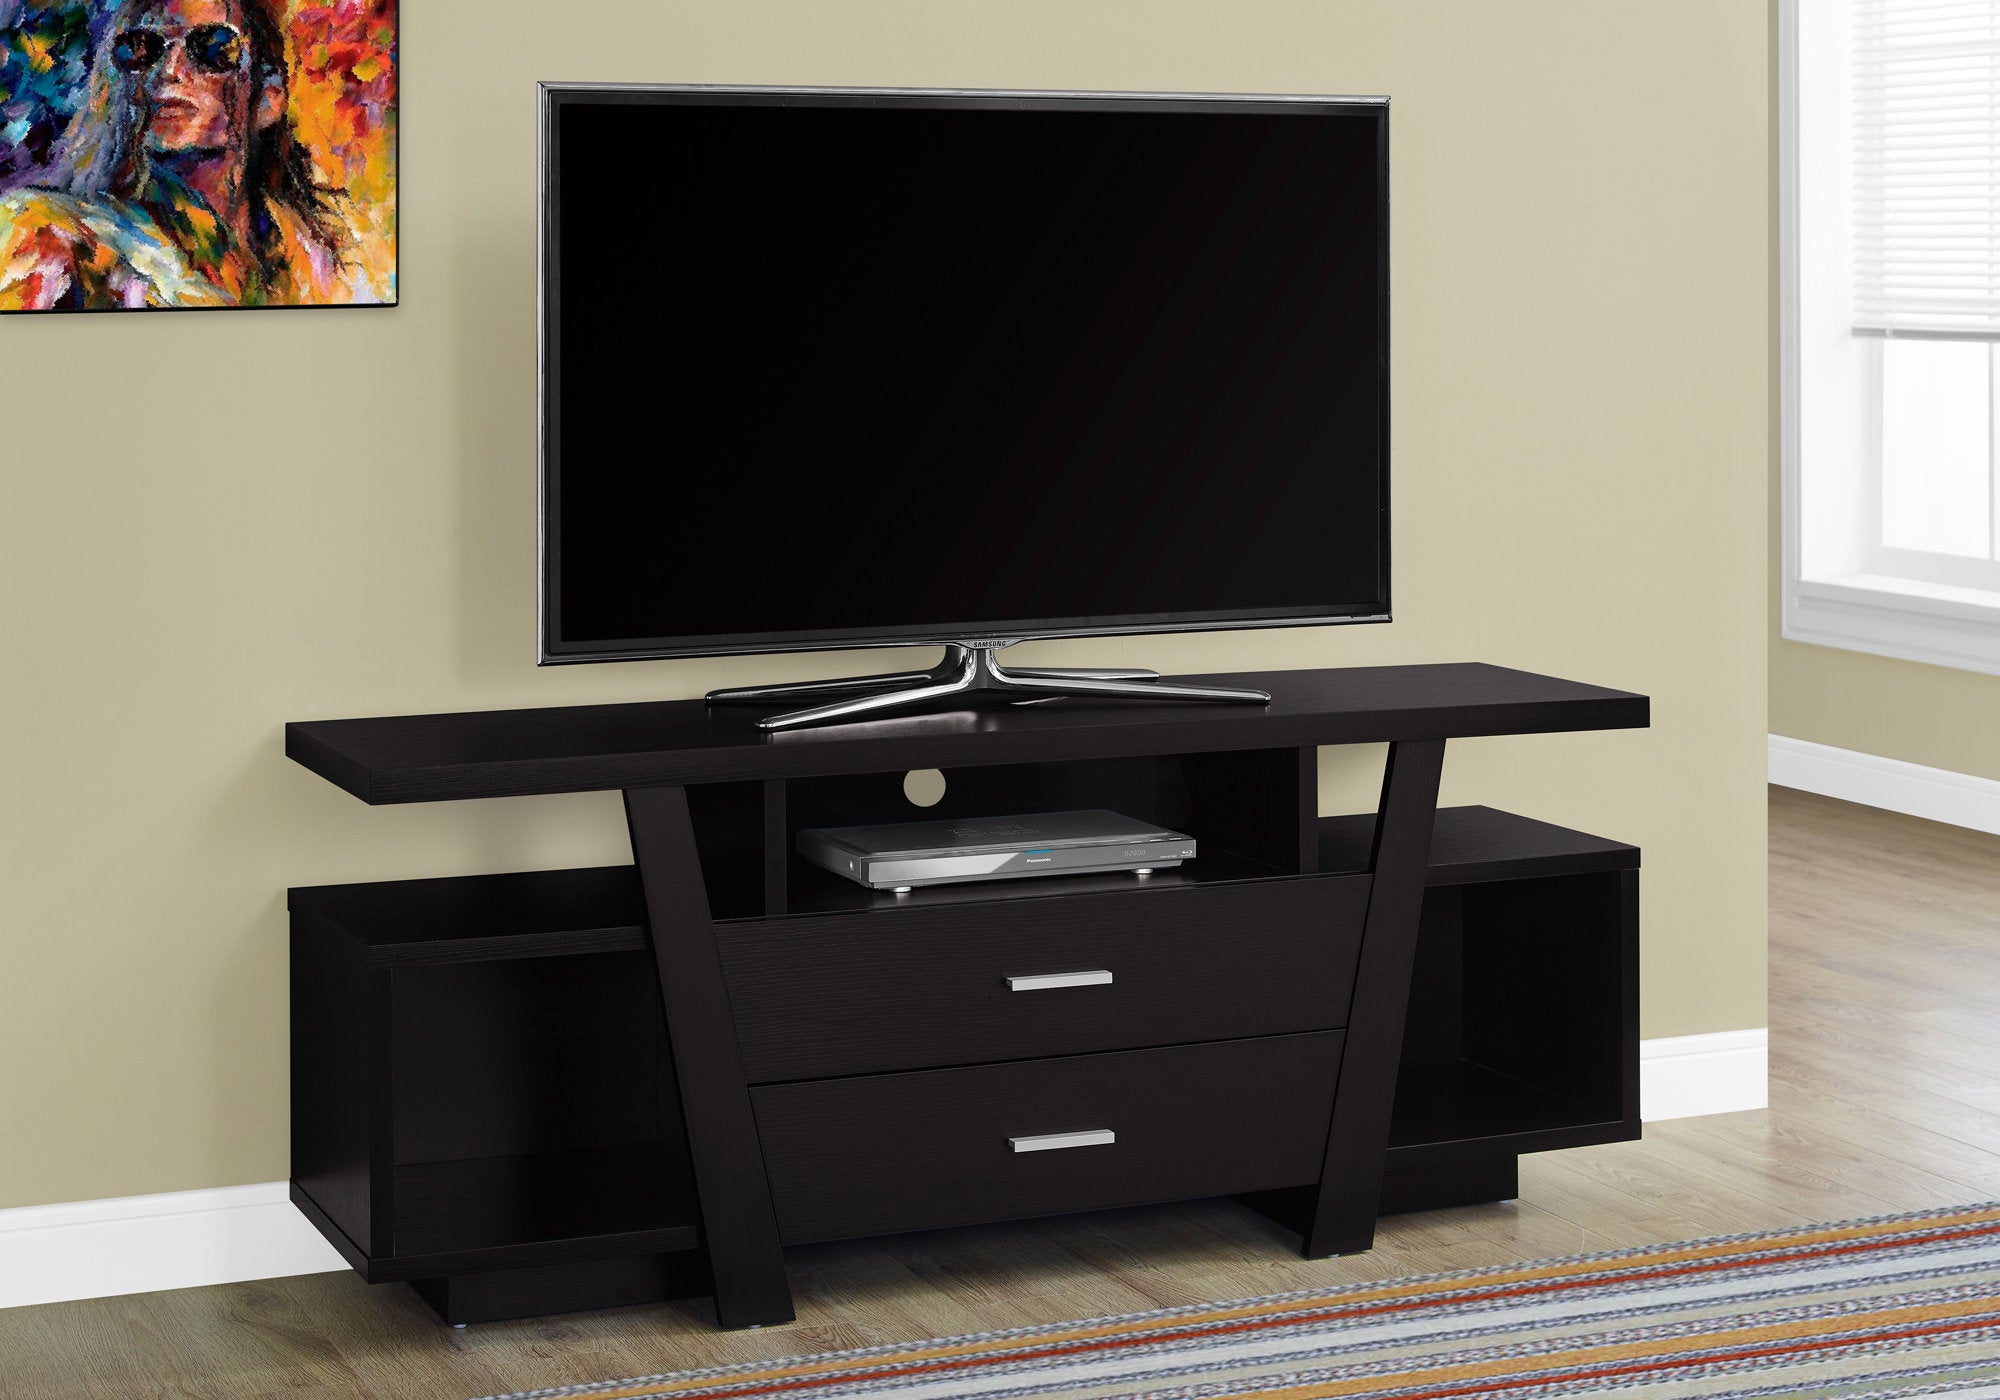 MN-982720    Tv Stand, 60 Inch, Console, Media Entertainment Center, Storage Cabinet, Living Room, Bedroom, Laminate, Dark Brown, Contemporary, Modern